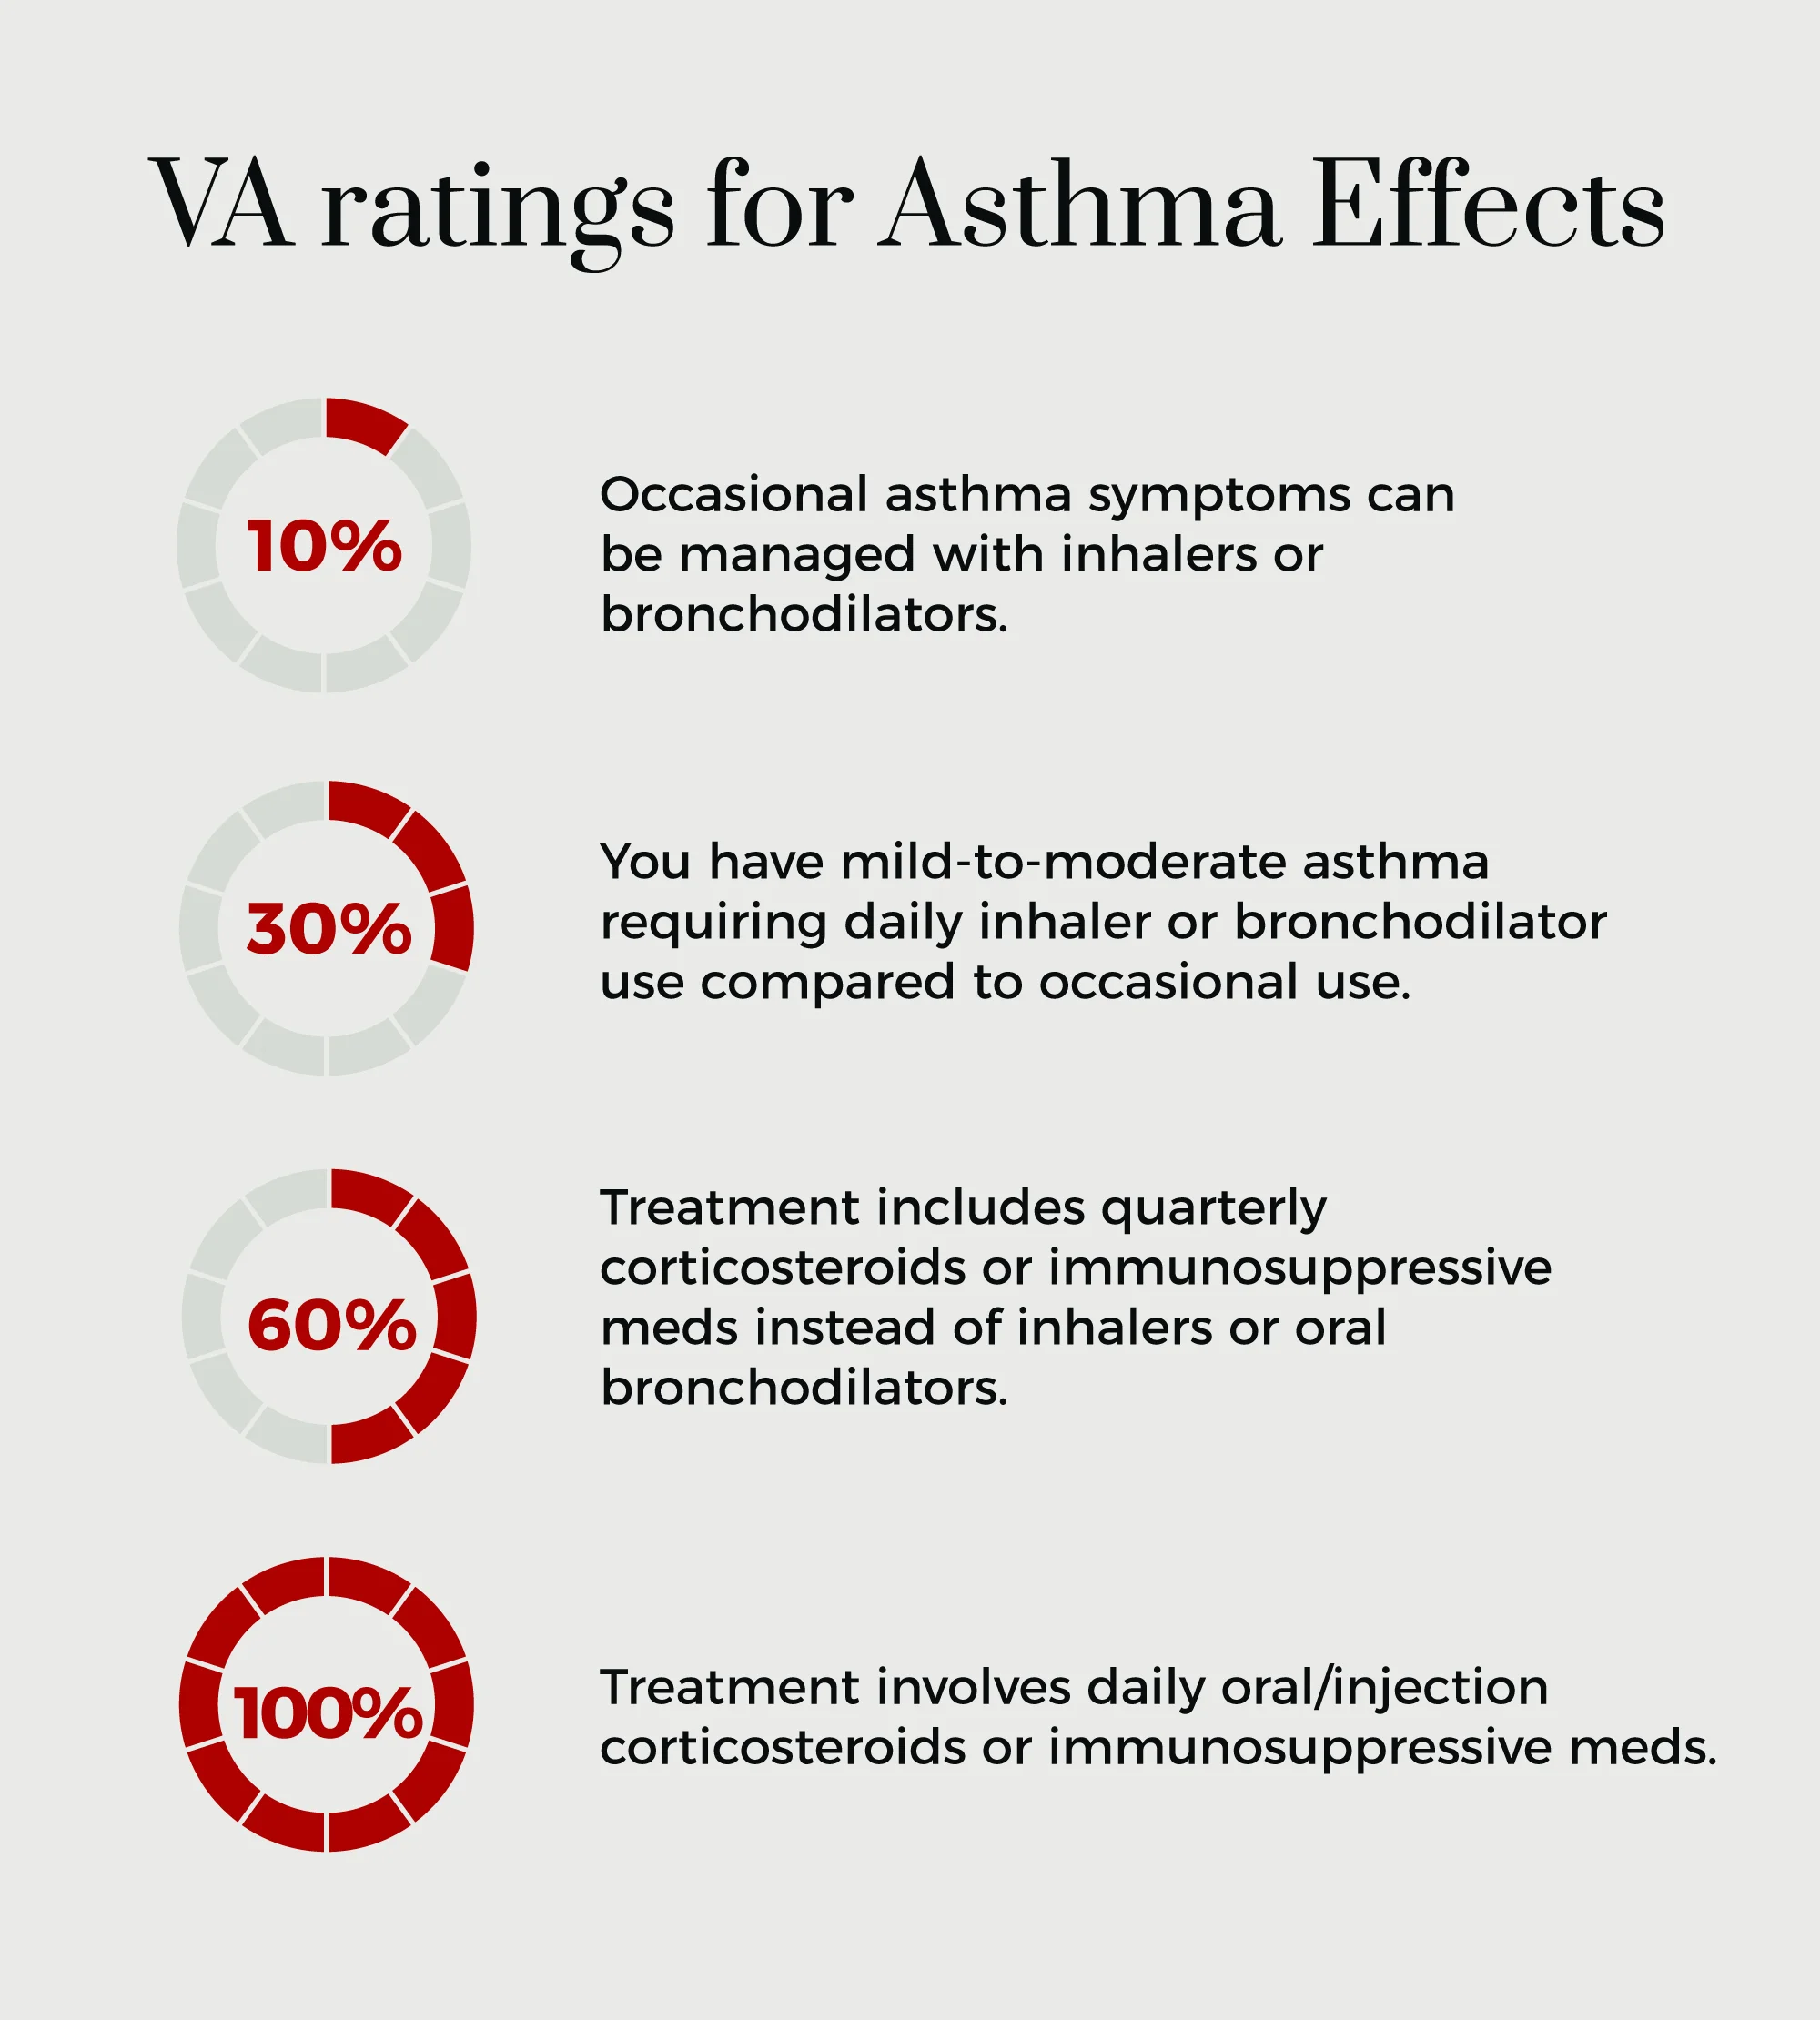 VA ratings for asthma effects